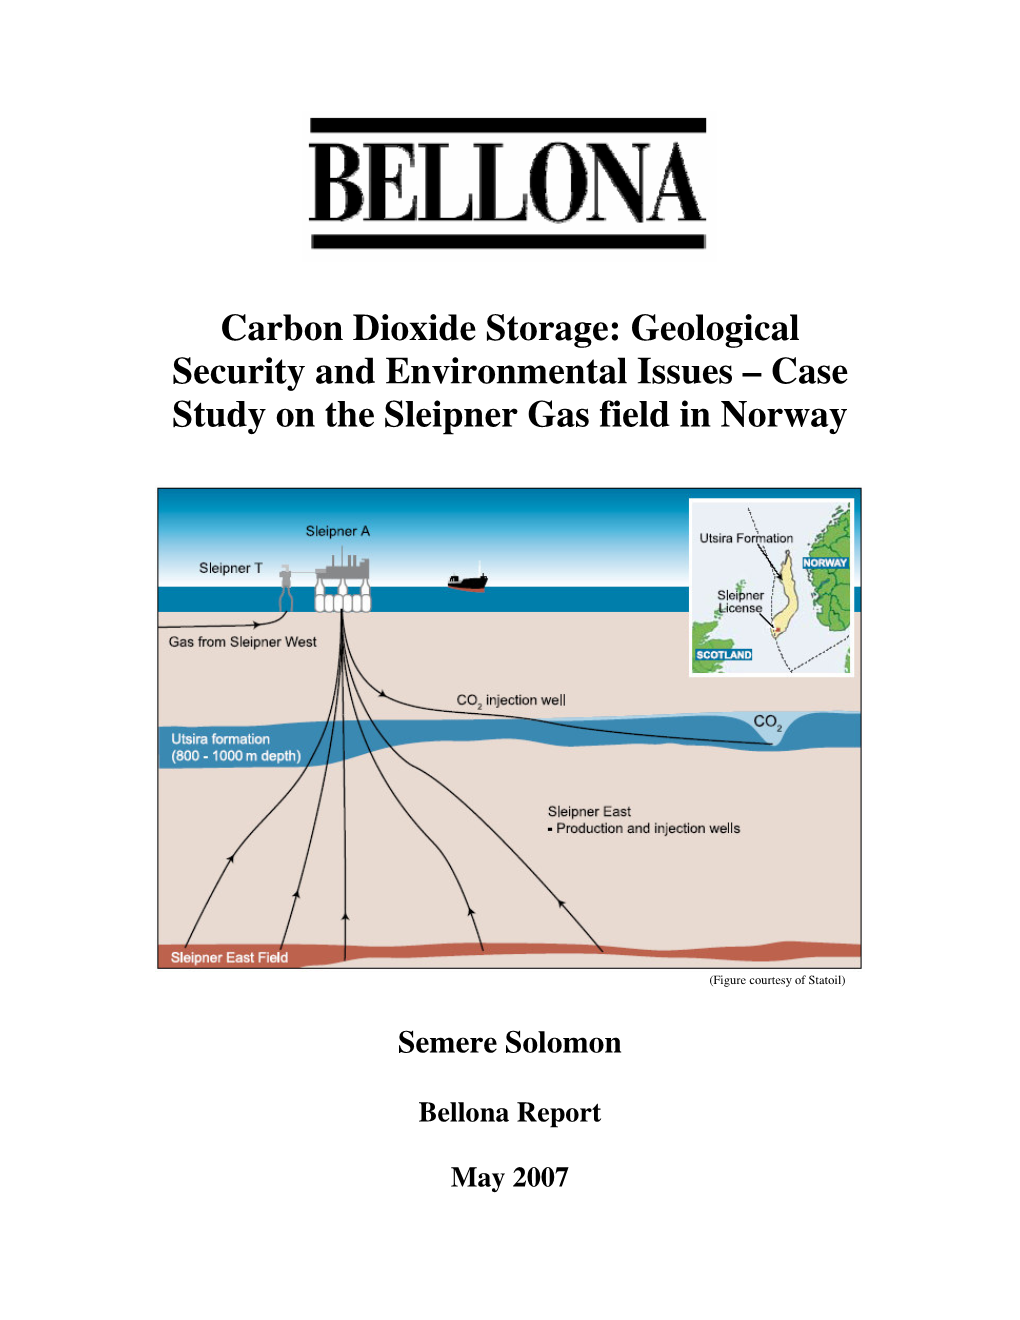 Carbon Dioxide Storage: Geological Security and Environmental Issues – Case Study on the Sleipner Gas Field in Norway